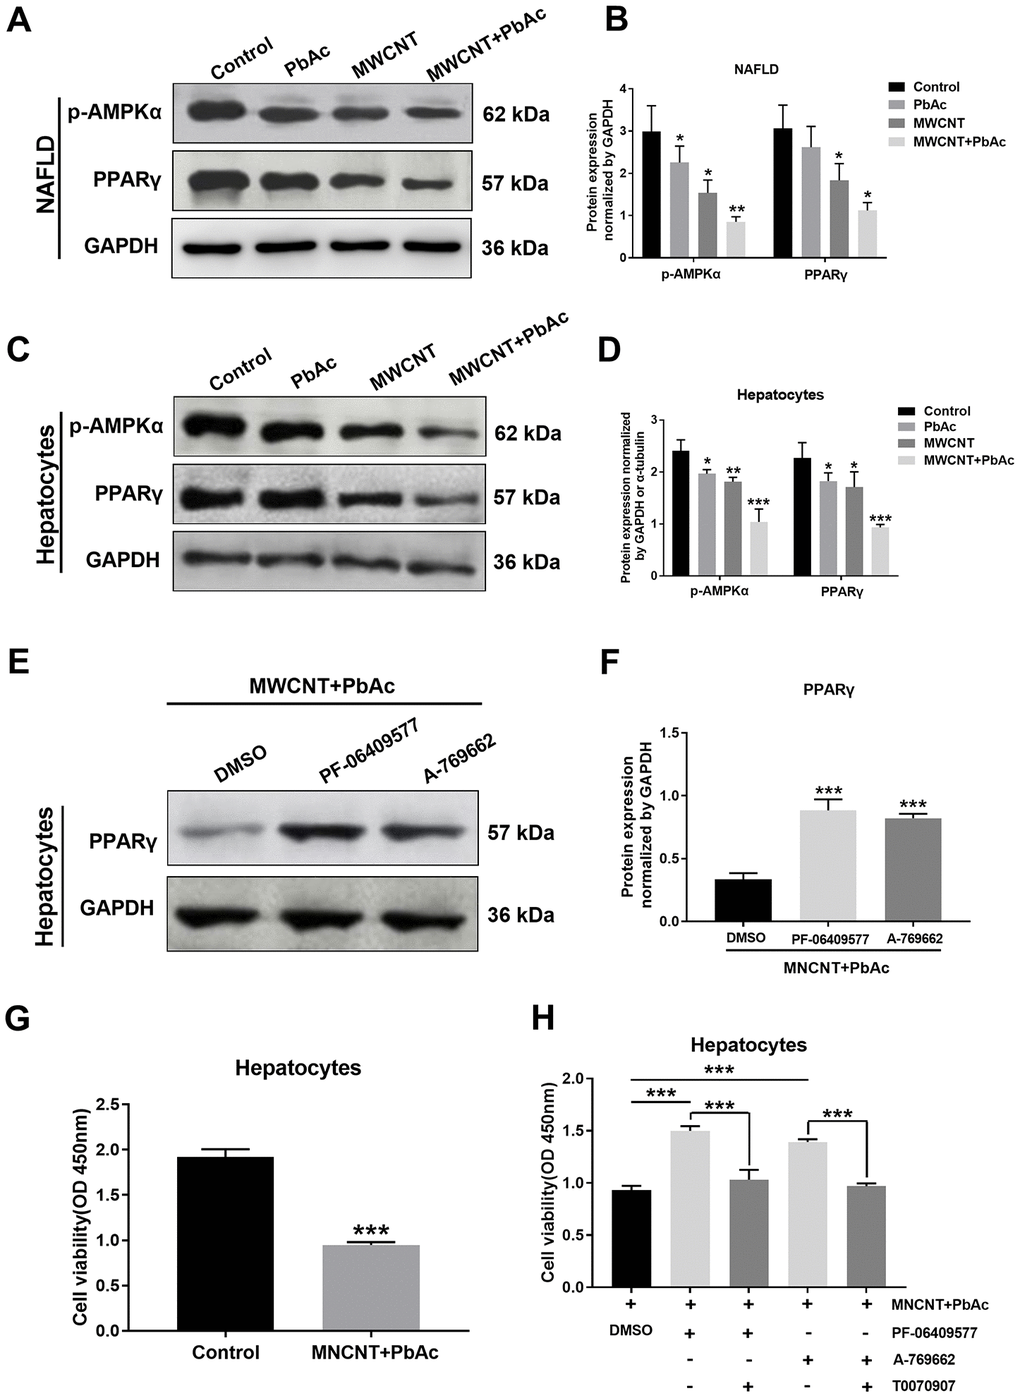 Combined administration of MWCNTs and PbAc may exert its hepatotoxicity to NAFLD mice via inhibiting AMPK/PPARγ pathway. Western blot analysis of PPARγ and p-AMPKα expressions in NAFLD mice livers (A) and in primary hepatocytes from NAFLD mice (C) upon the low dose of PbAc, MWCNTs or MWCNTs + PbAc administration. (B, D) PPARγ and p-AMPKα expression levels normalized to GAPDH (*PE) After treatments with DMSO or two AMPK activators (0.5 μM PF-06409577 and 10 μM A-769662) in addition to MWCNTs + PbAc, PPARγ expressions in primary hepatocytes from NAFLD mice were tested using western blot analysis. (F) PPARγ expression levels normalized to GAPDH (***PG) Cell viability of primary hepatocytes from NAFLD mice upon the administration of saline water or MWCNTs + PbAc (***PH) In addition to MWCNTs + PbAc, primary hepatocytes from NAFLD mice were also incubated with DMSO, PF-06409577 (0.5 μM), A-769662 (10 μM) or T0070907 (a selective PPARγ antagonist, 50 μM), then the cell viability was measured (***P